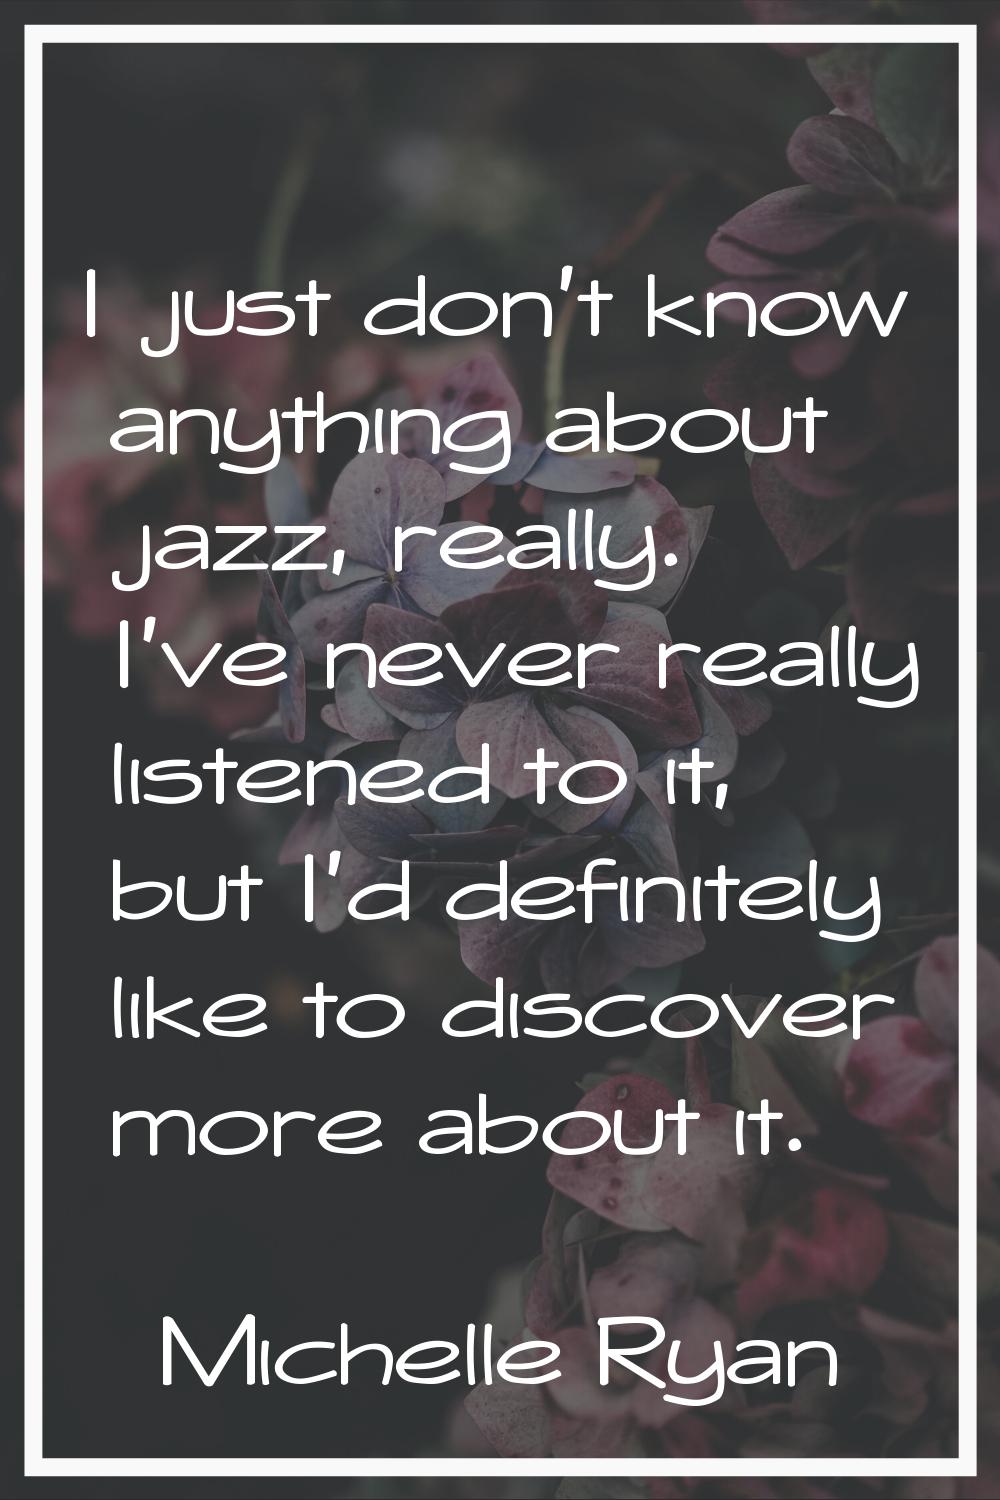 I just don't know anything about jazz, really. I've never really listened to it, but I'd definitely